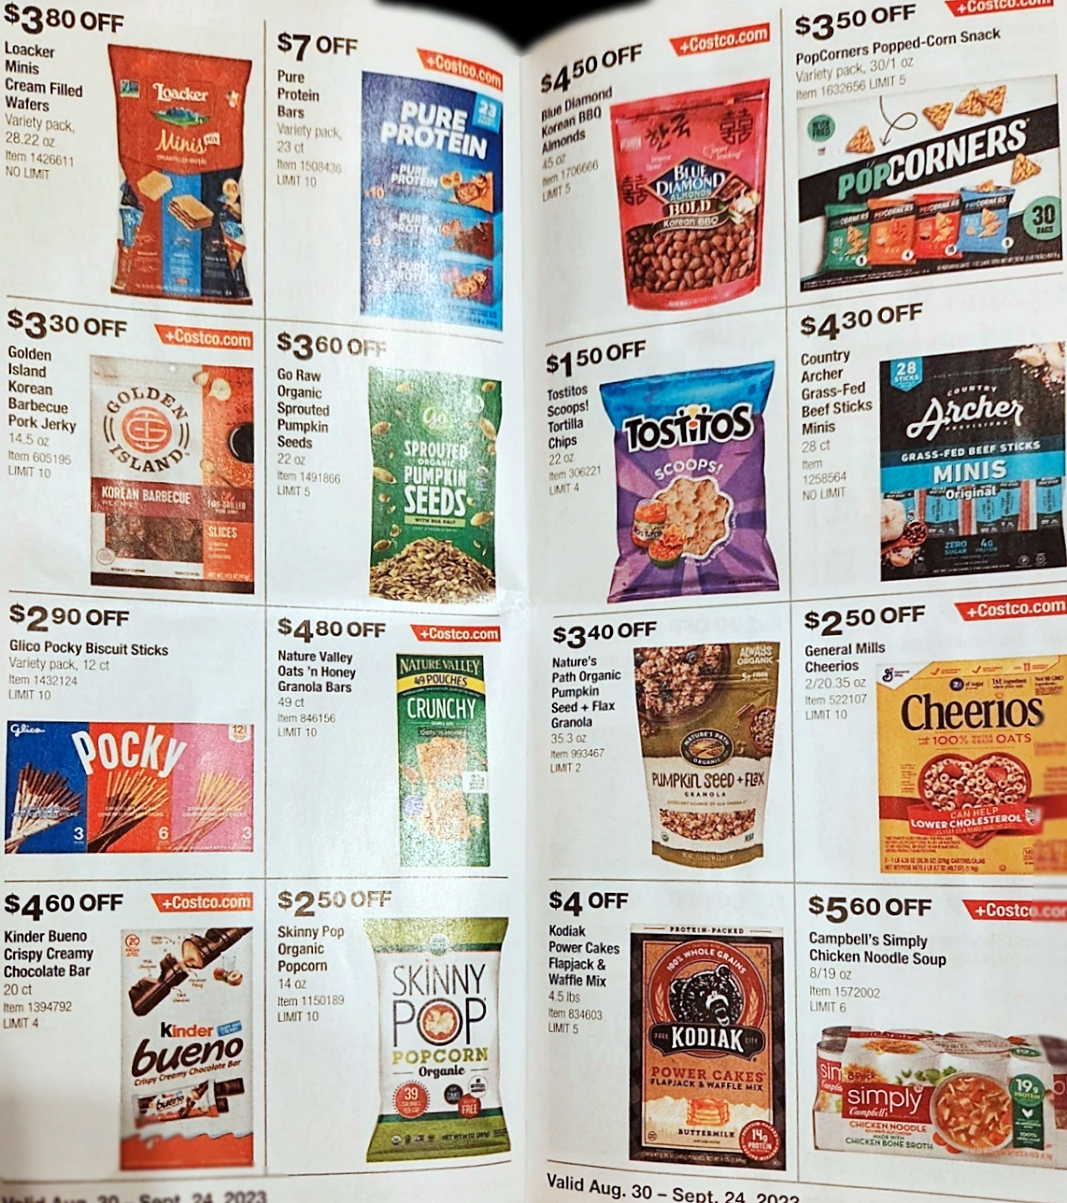 Costco Coupon Book SEPTEMBER 2023 | P 18 and 19